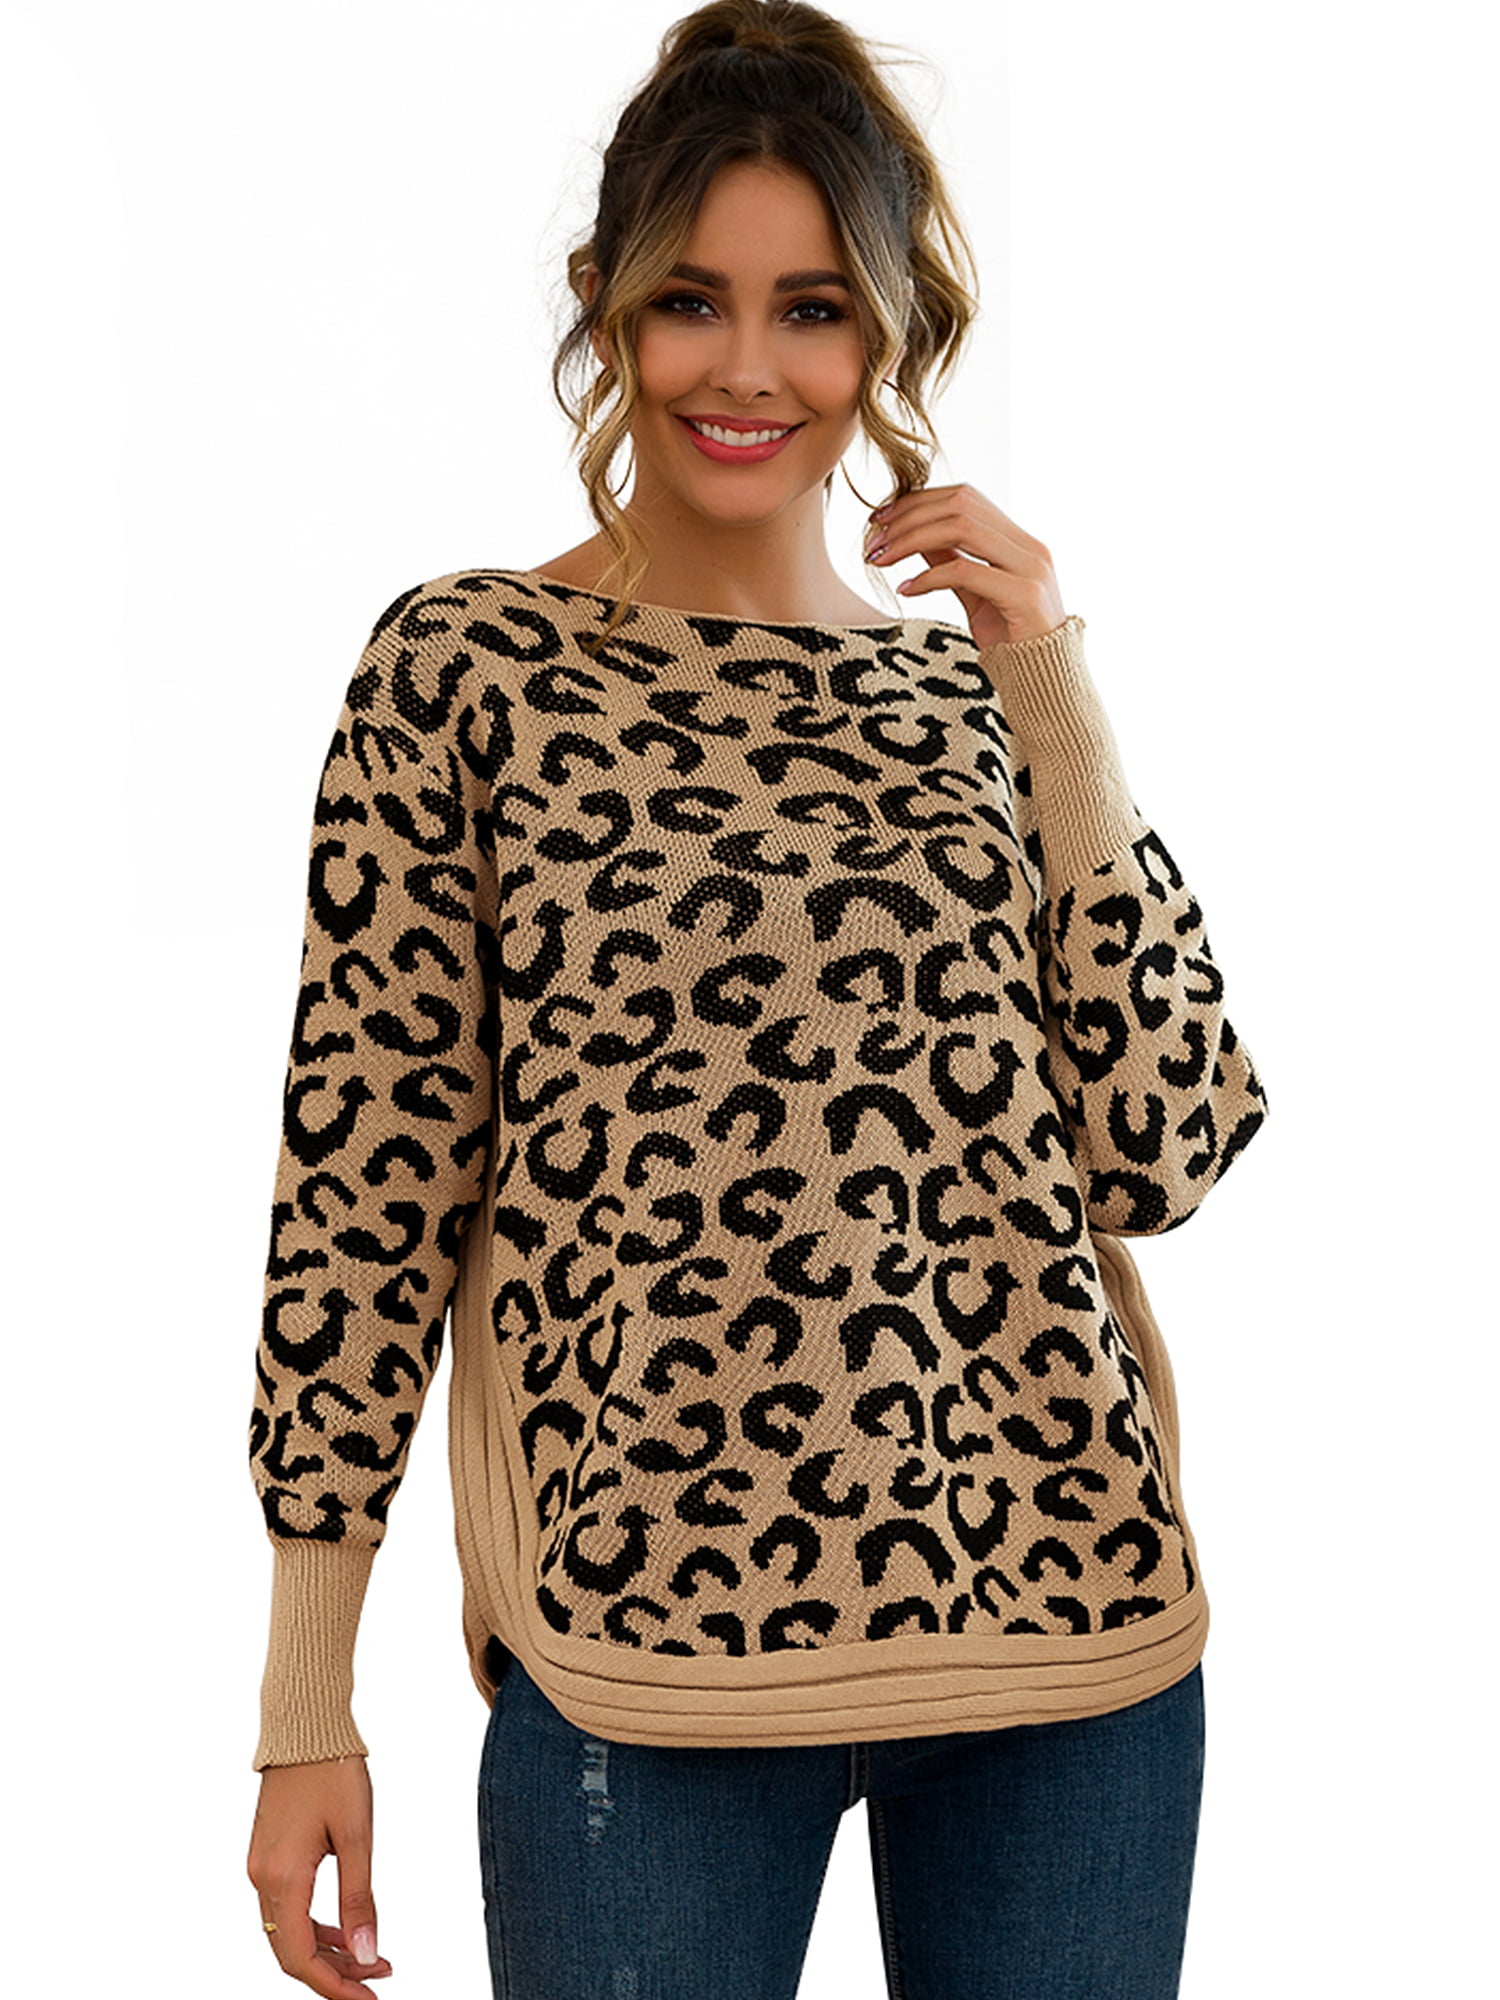 Newtechnologyy Women S Leopard Print Sweater Ladies Fashion Solid Casual Pullovers O Neck